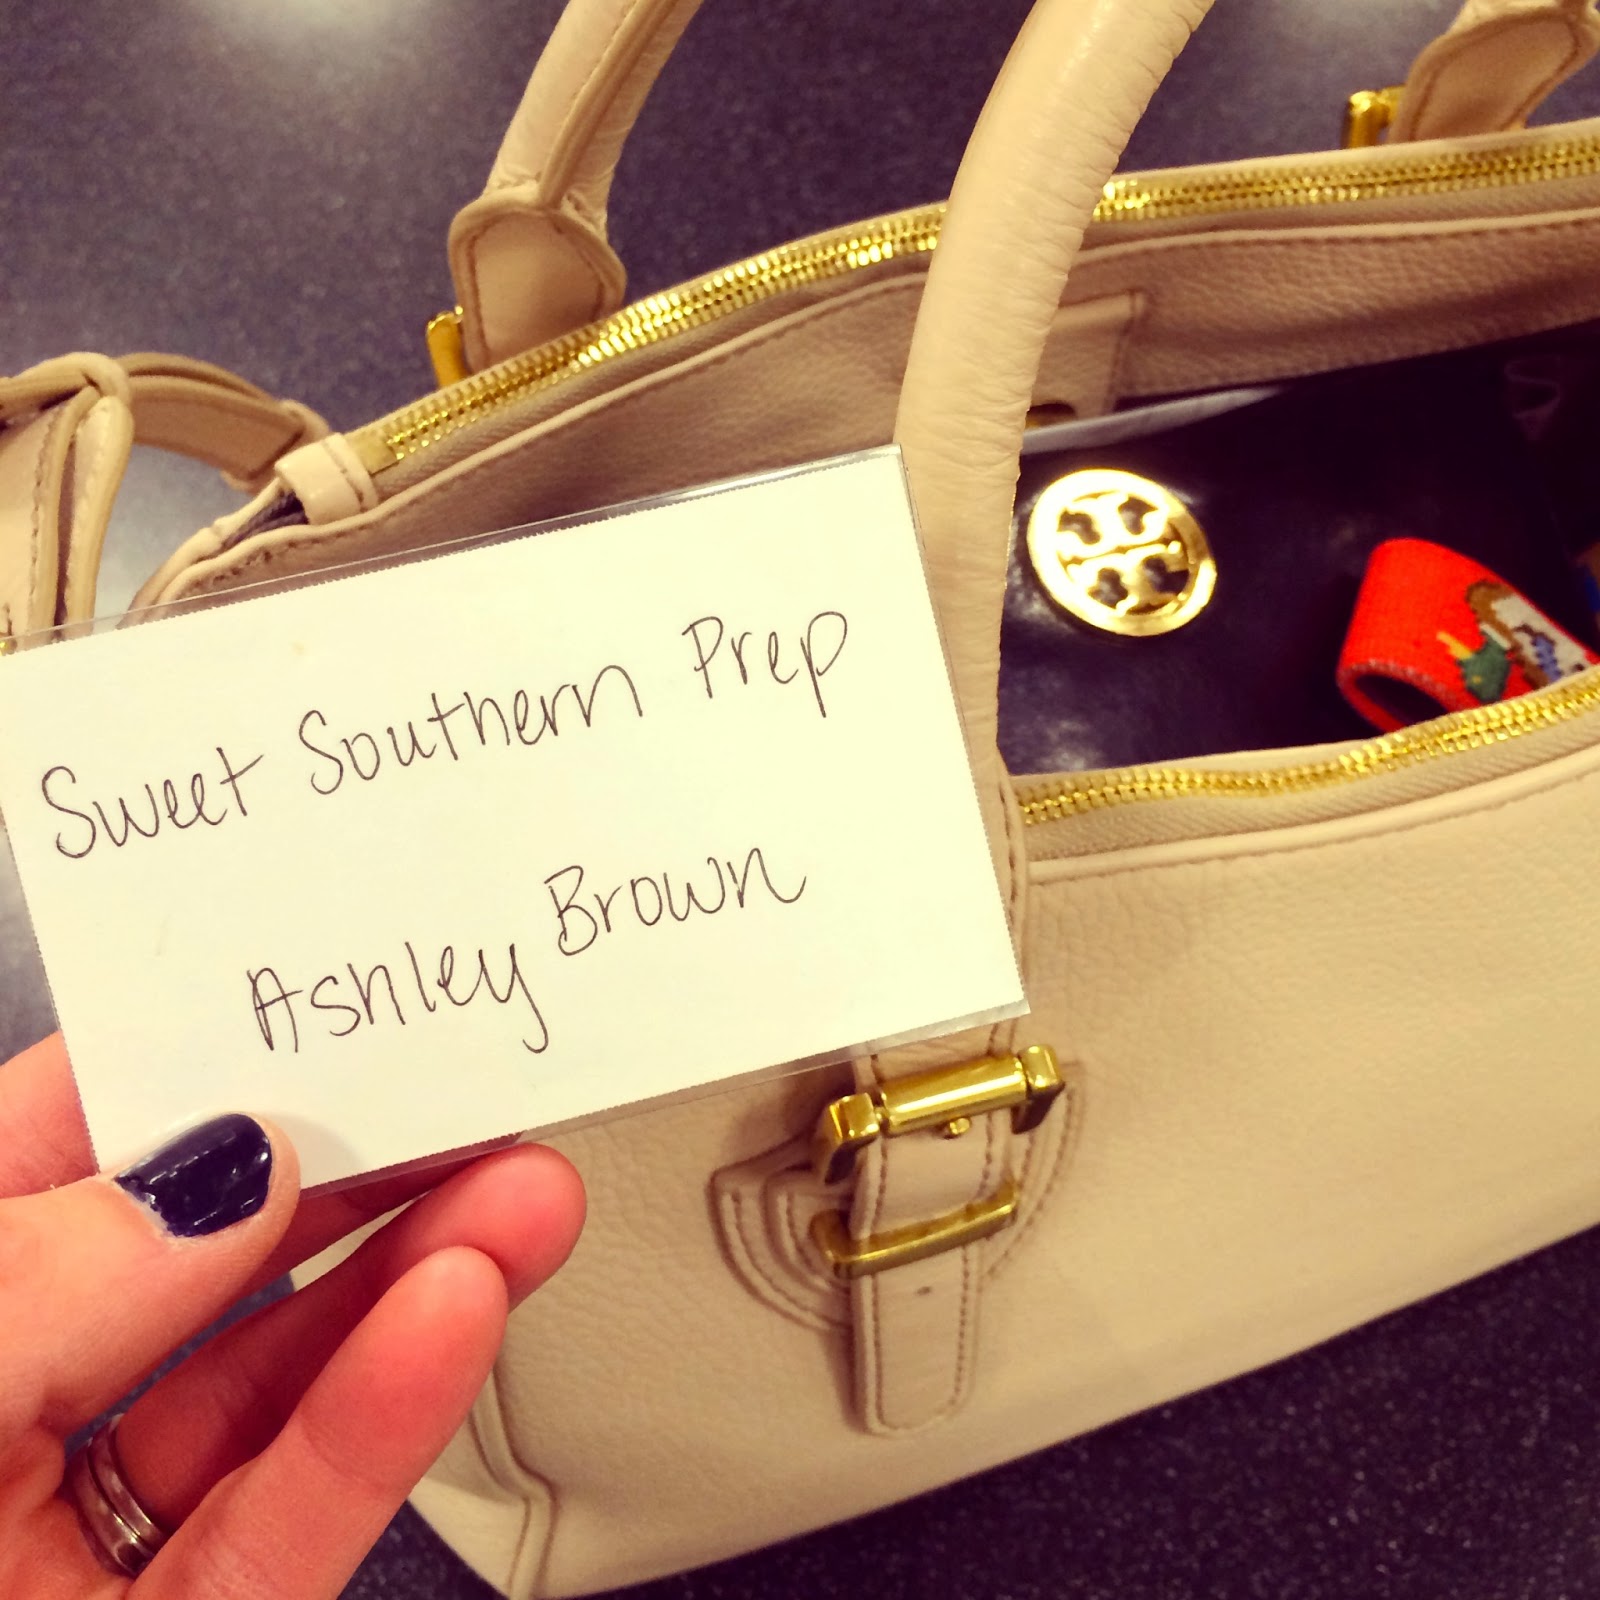 Fashion Friday: OOTDs + Belk Spring Fashion Preview – Sweet Southern Prep